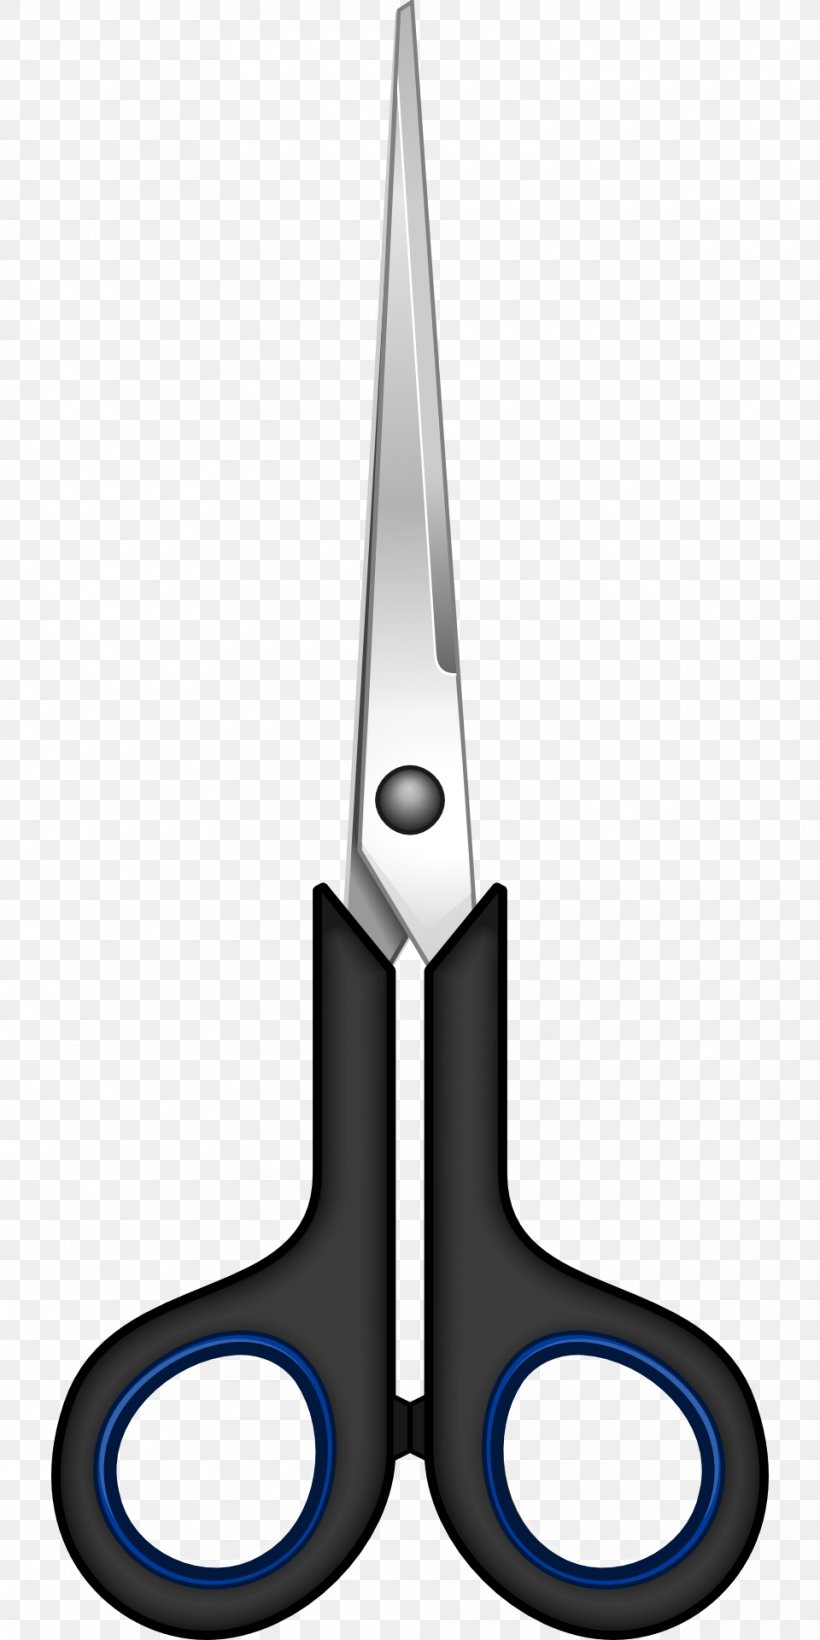 Scissors Hair-cutting Shears Clip Art, PNG, 960x1920px, Scissors, Graphic Arts, Haircutting Shears, Royaltyfree, Tool Download Free